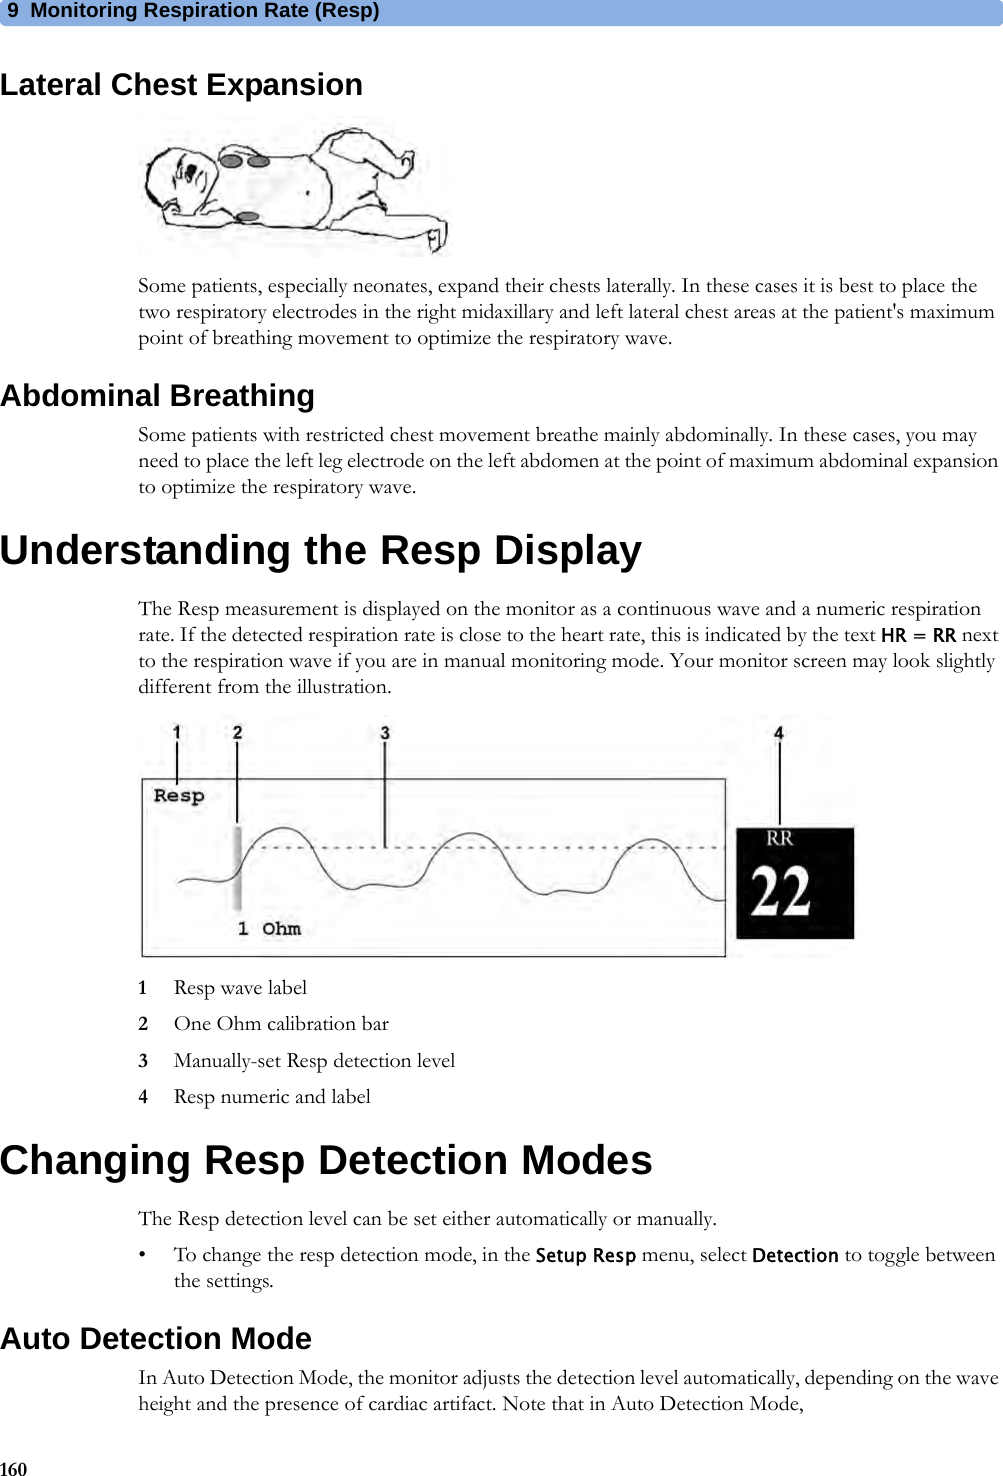 9 Monitoring Respiration Rate (Resp)160Lateral Chest ExpansionSome patients, especially neonates, expand their chests laterally. In these cases it is best to place the two respiratory electrodes in the right midaxillary and left lateral chest areas at the patient&apos;s maximum point of breathing movement to optimize the respiratory wave.Abdominal BreathingSome patients with restricted chest movement breathe mainly abdominally. In these cases, you may need to place the left leg electrode on the left abdomen at the point of maximum abdominal expansion to optimize the respiratory wave.Understanding the Resp DisplayThe Resp measurement is displayed on the monitor as a continuous wave and a numeric respiration rate. If the detected respiration rate is close to the heart rate, this is indicated by the text HR = RR next to the respiration wave if you are in manual monitoring mode. Your monitor screen may look slightly different from the illustration.1Resp wave label2One Ohm calibration bar3Manually-set Resp detection level4Resp numeric and labelChanging Resp Detection ModesThe Resp detection level can be set either automatically or manually.• To change the resp detection mode, in the Setup Resp menu, select Detection to toggle between the settings.Auto Detection ModeIn Auto Detection Mode, the monitor adjusts the detection level automatically, depending on the wave height and the presence of cardiac artifact. Note that in Auto Detection Mode,